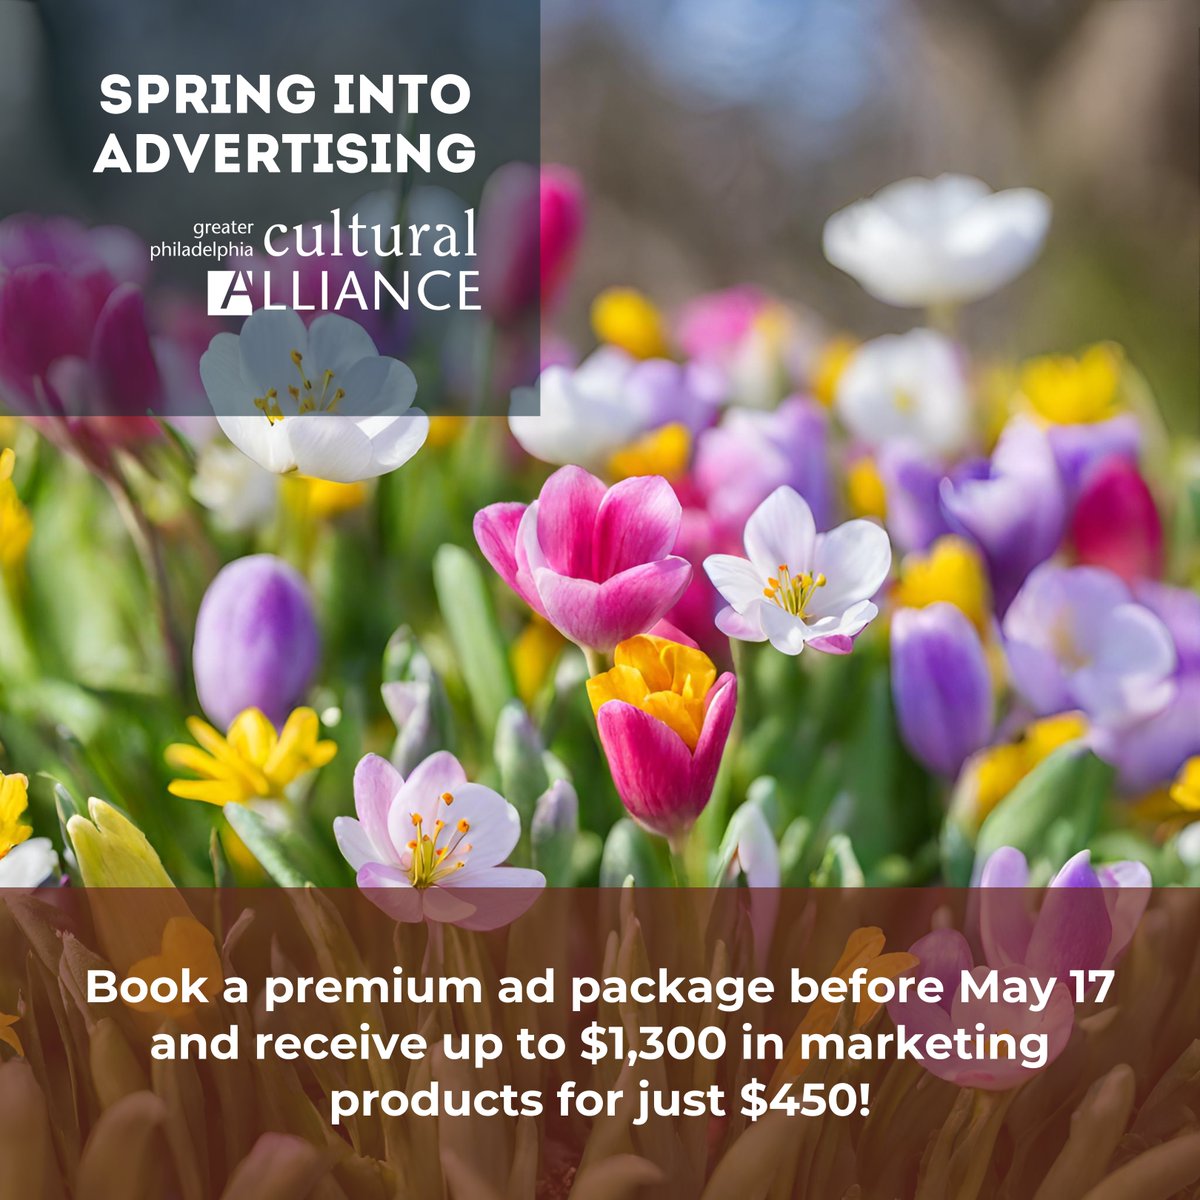 We just launched a special advertising promotion: Spring into Advertising! Book a premium ad package before May 17 and receive up to $1,300 in marketing products for just $450! Learn more at: philaculture.org/2024-spring-ad… or reach out directly to madelinea@philaculture.org